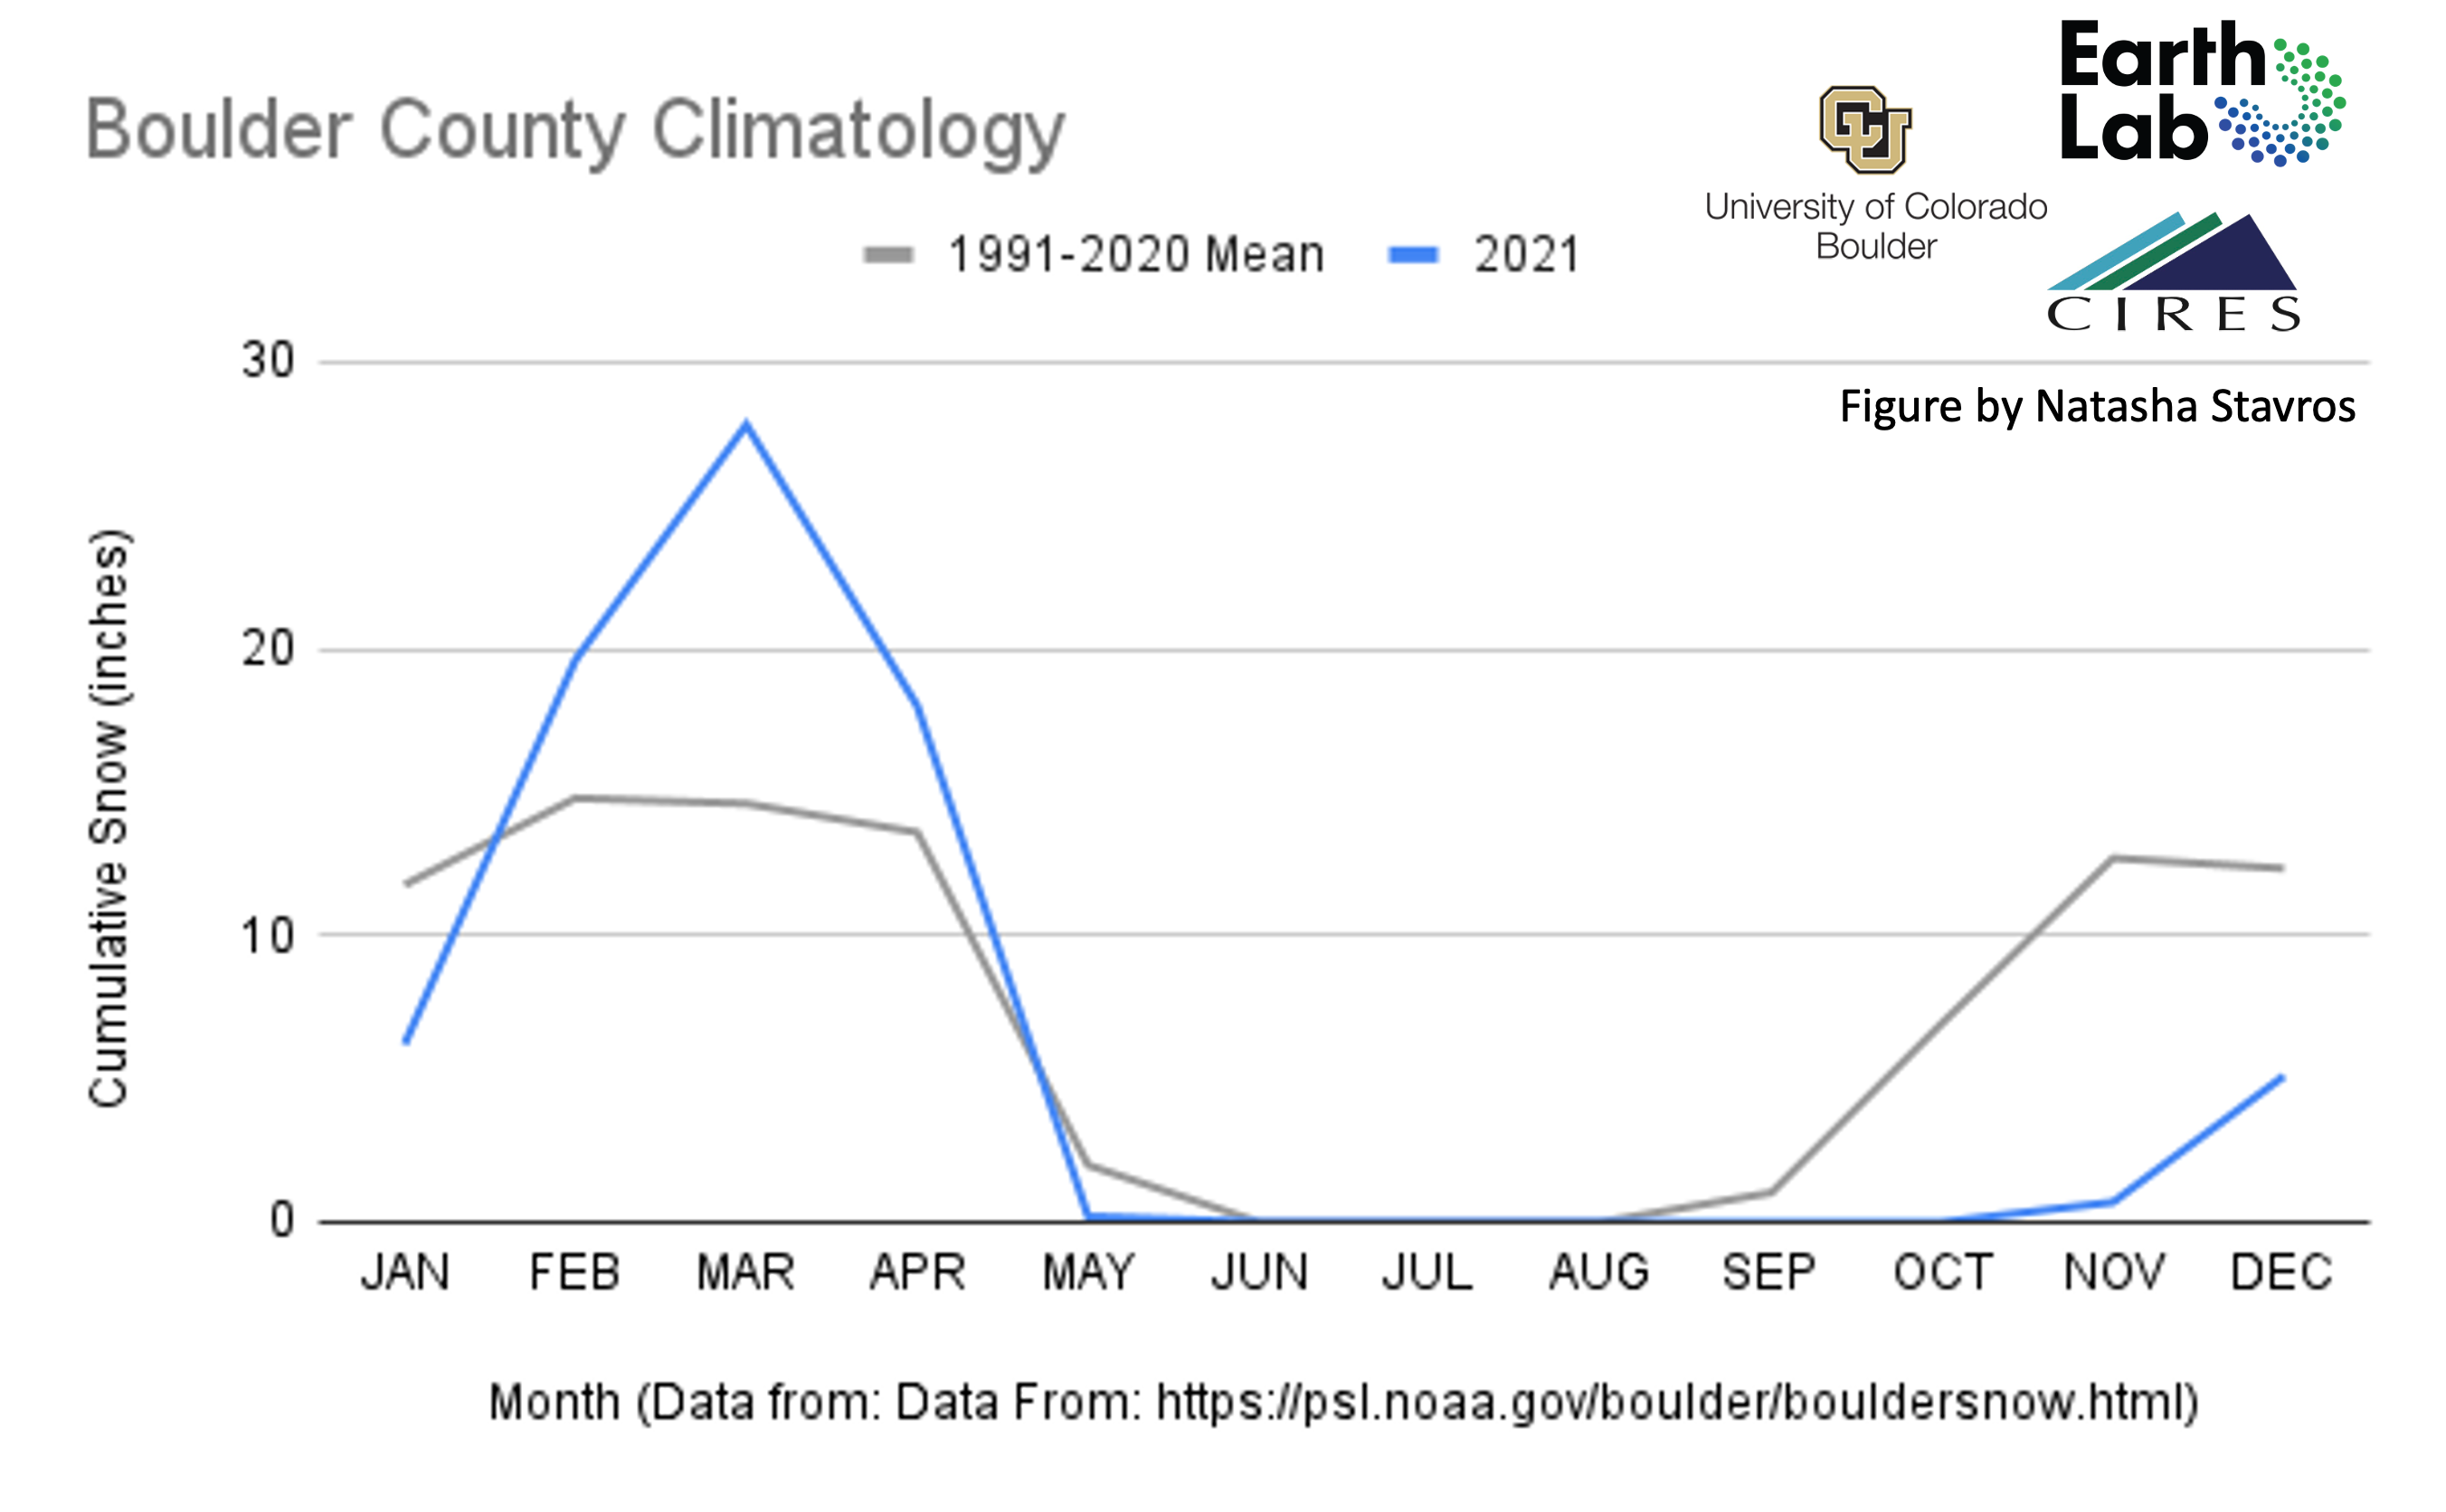 Boulder County Snow 2021 compared to historical average